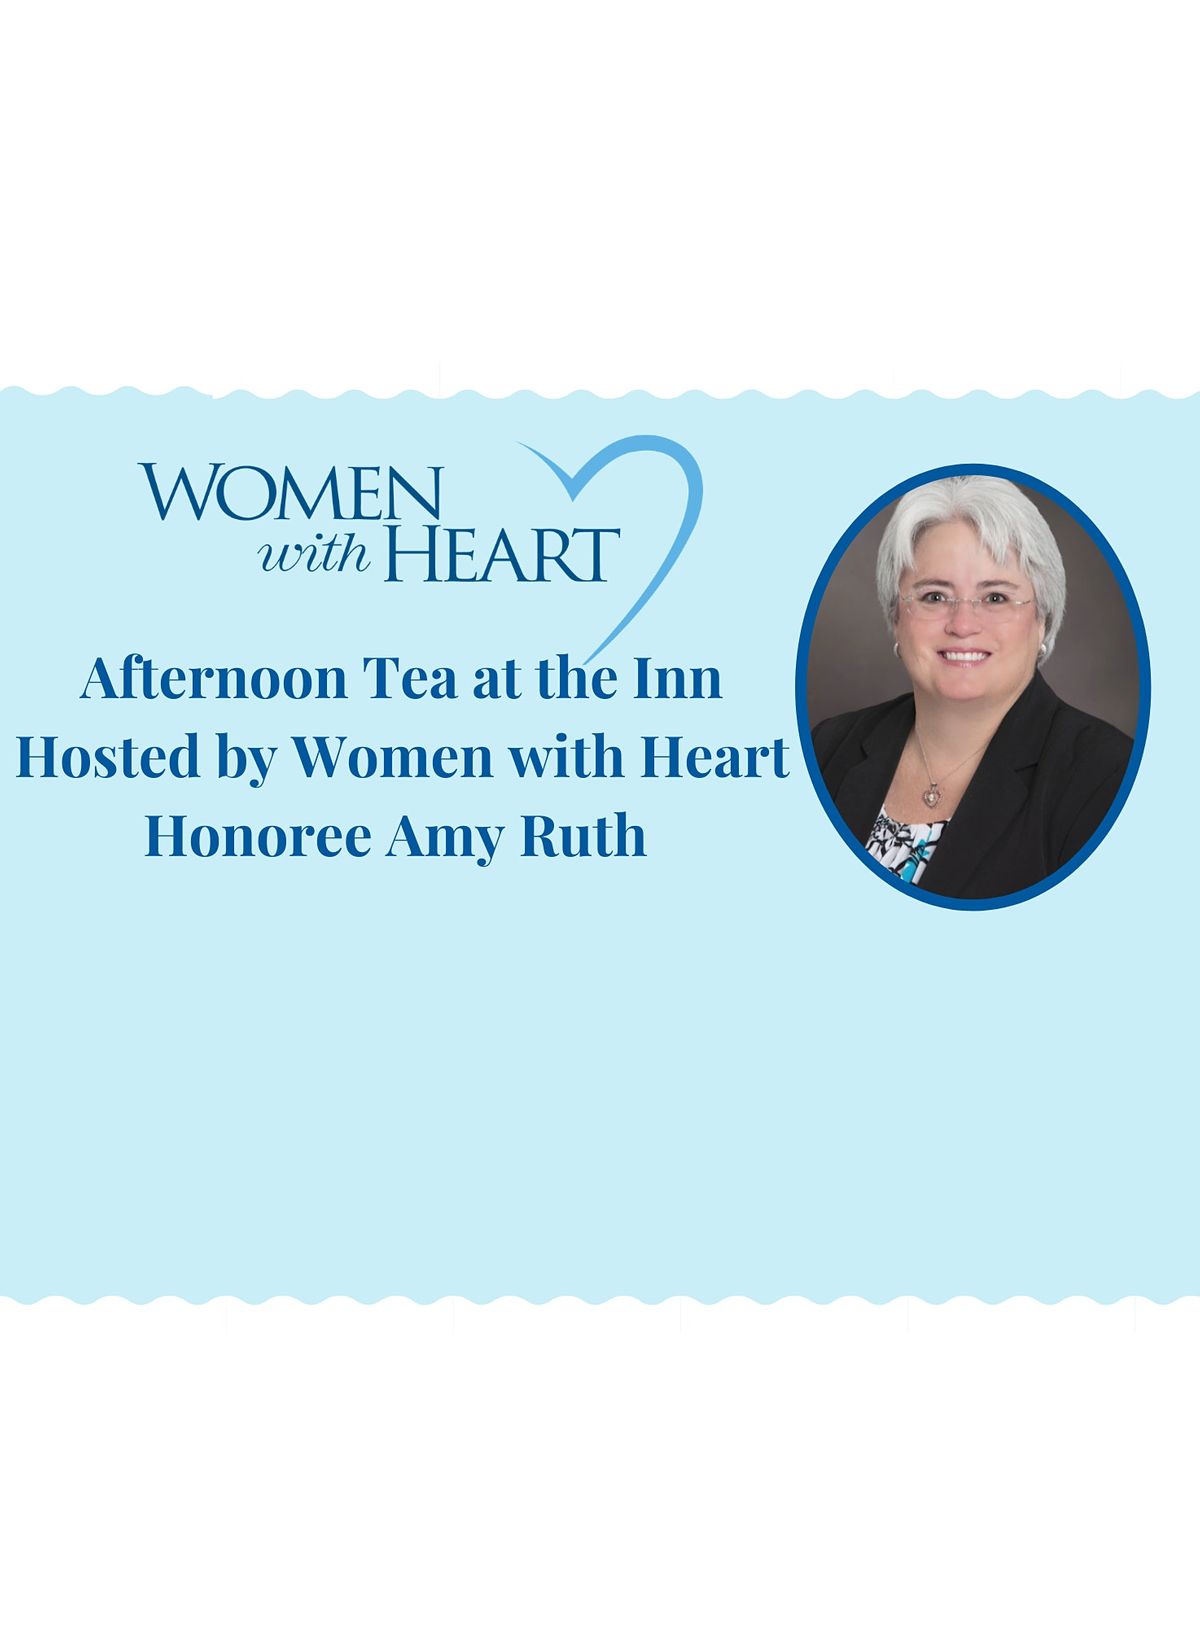 Afternoon Tea at the Inn Hosted by Women with Heart Honoree Amy Ruth